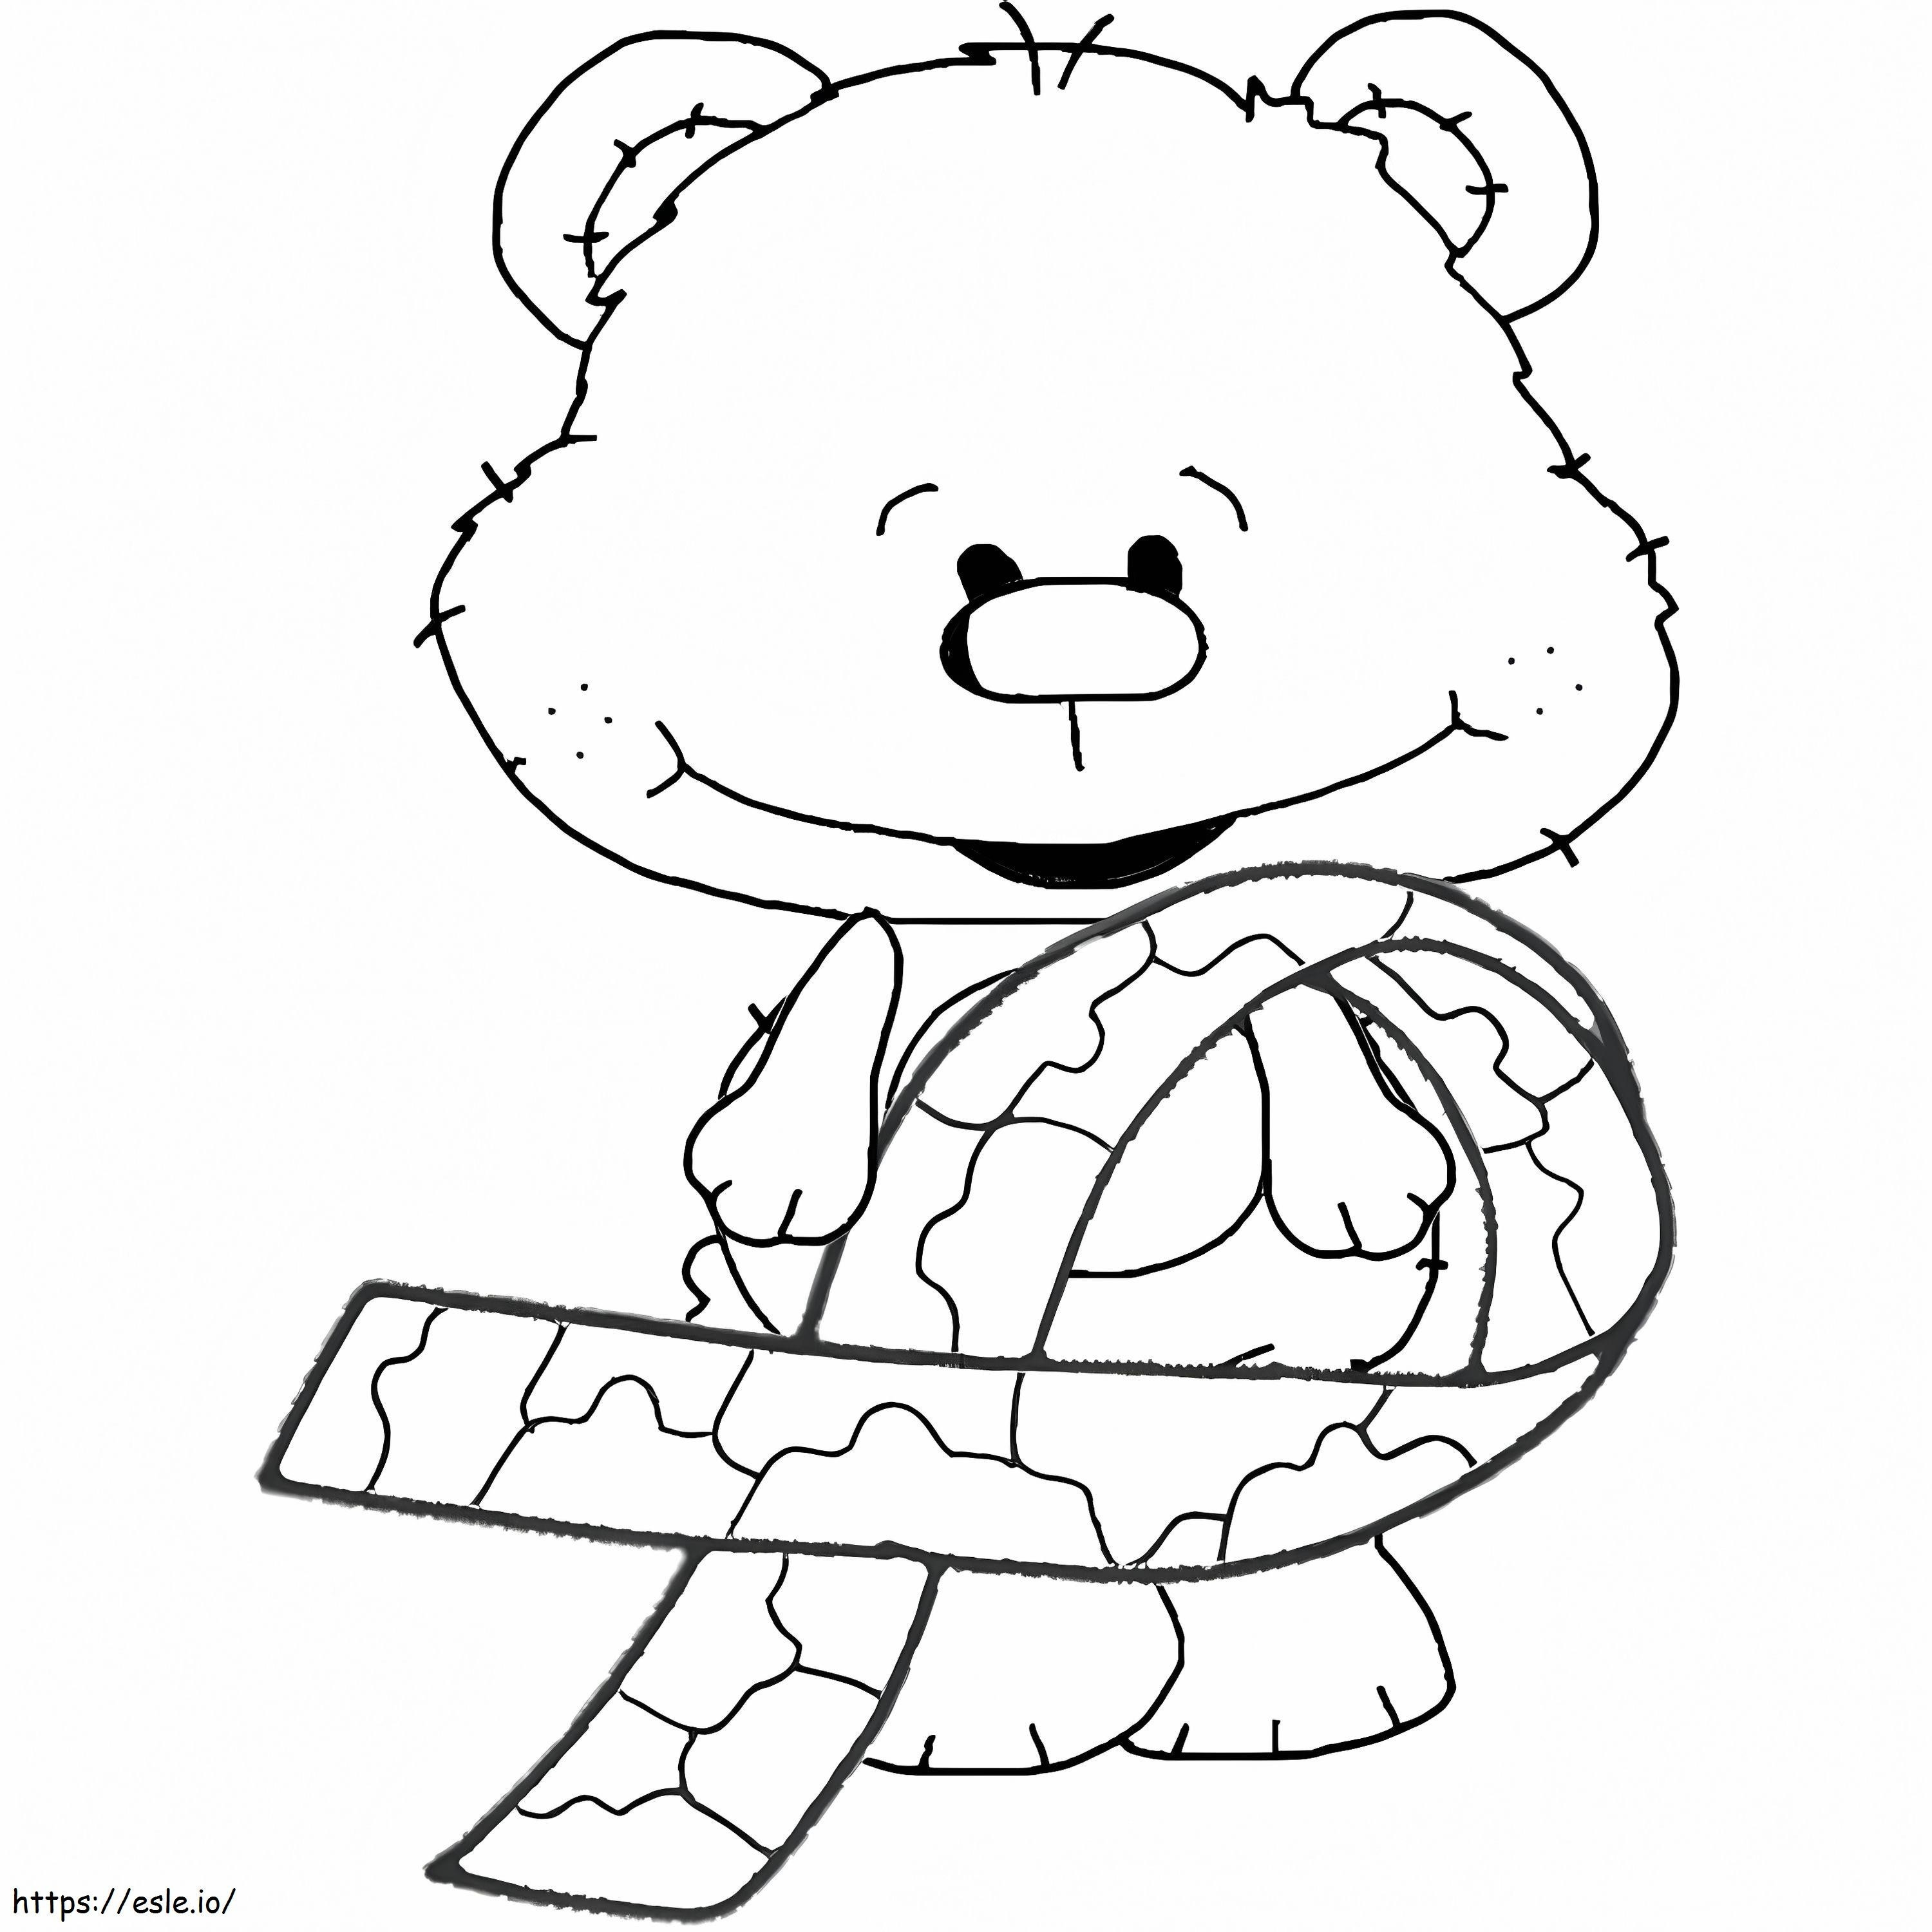 Teddy Bear With Autism Awareness Ribbon coloring page